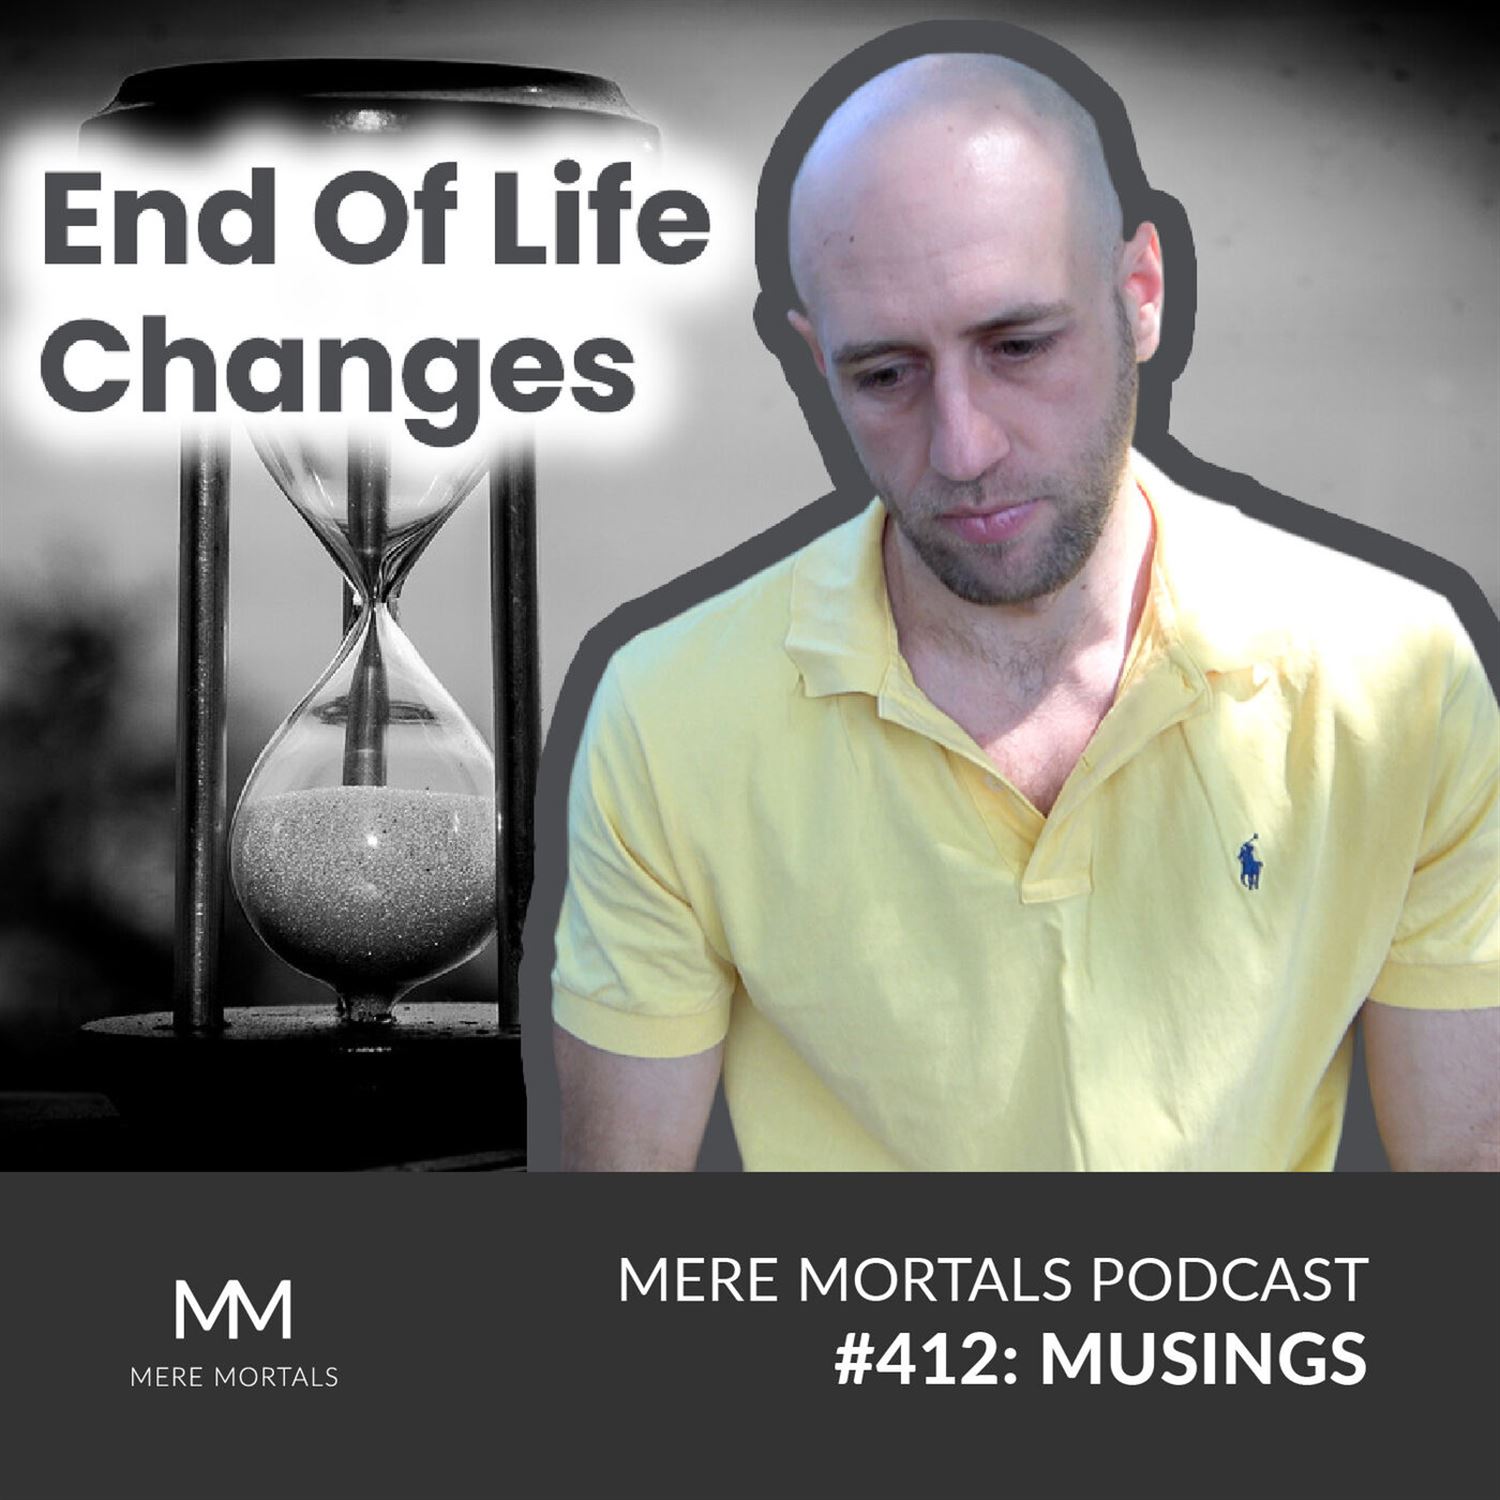 Thoughts On The Finiteness Of Life | The Effect Mortality Has Upon Us